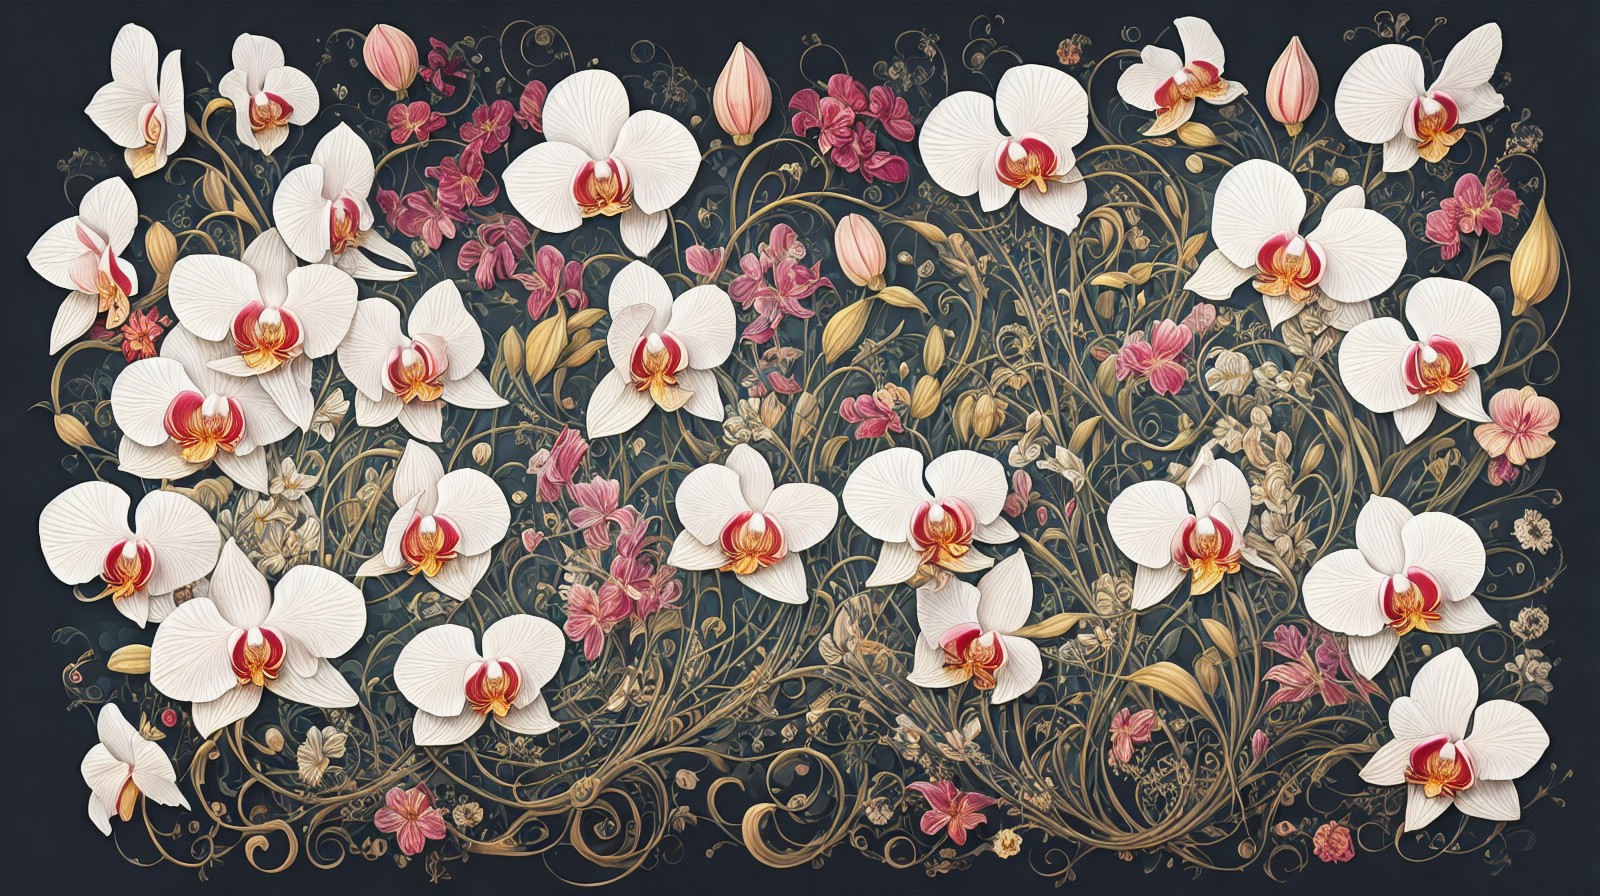 Surreal decorative painting filled with various flowers